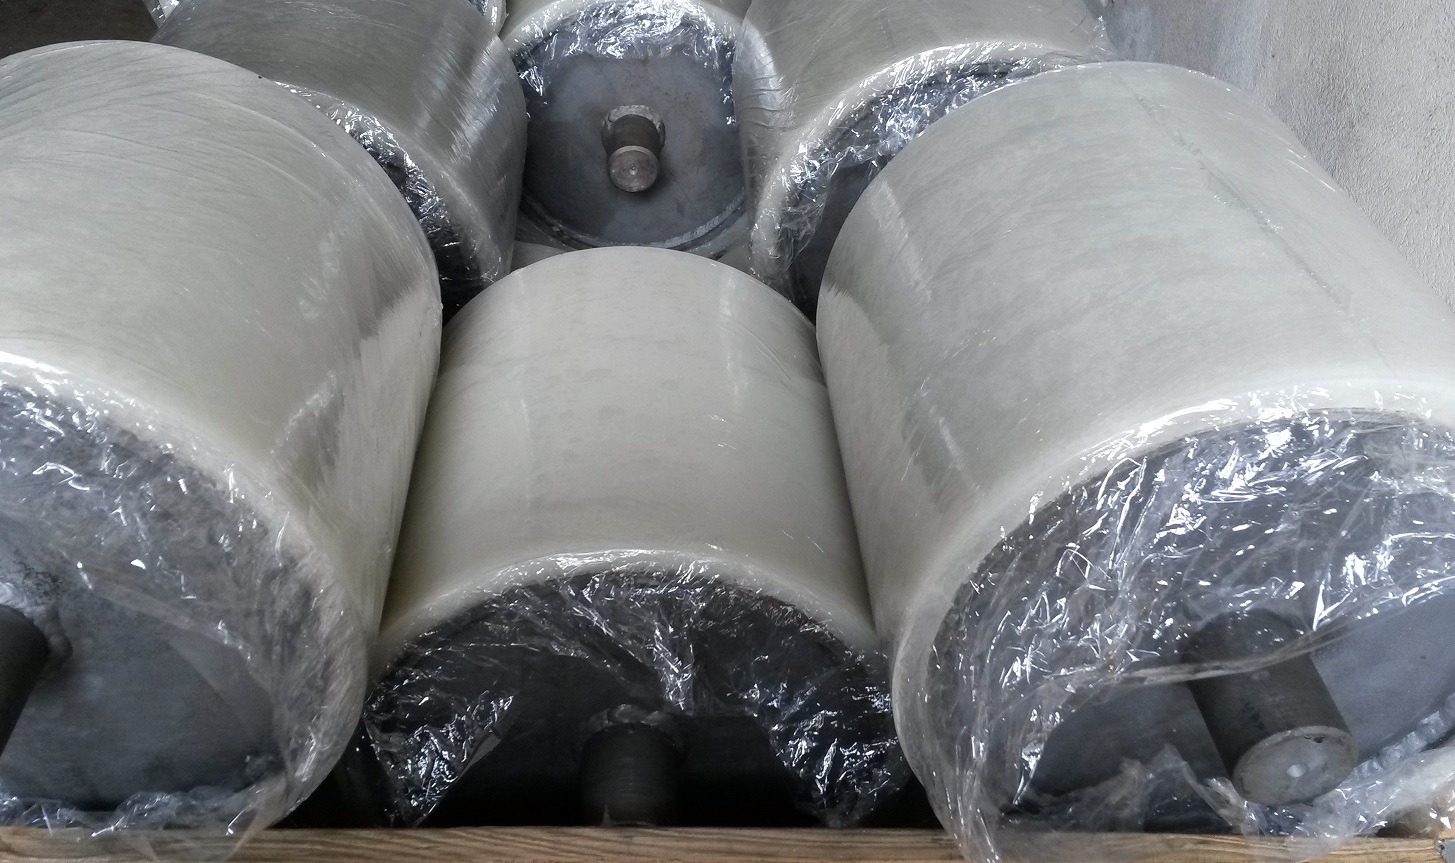 New 300mm diameter rollers used for V-shape pipe holders in gas-pipeline construction.